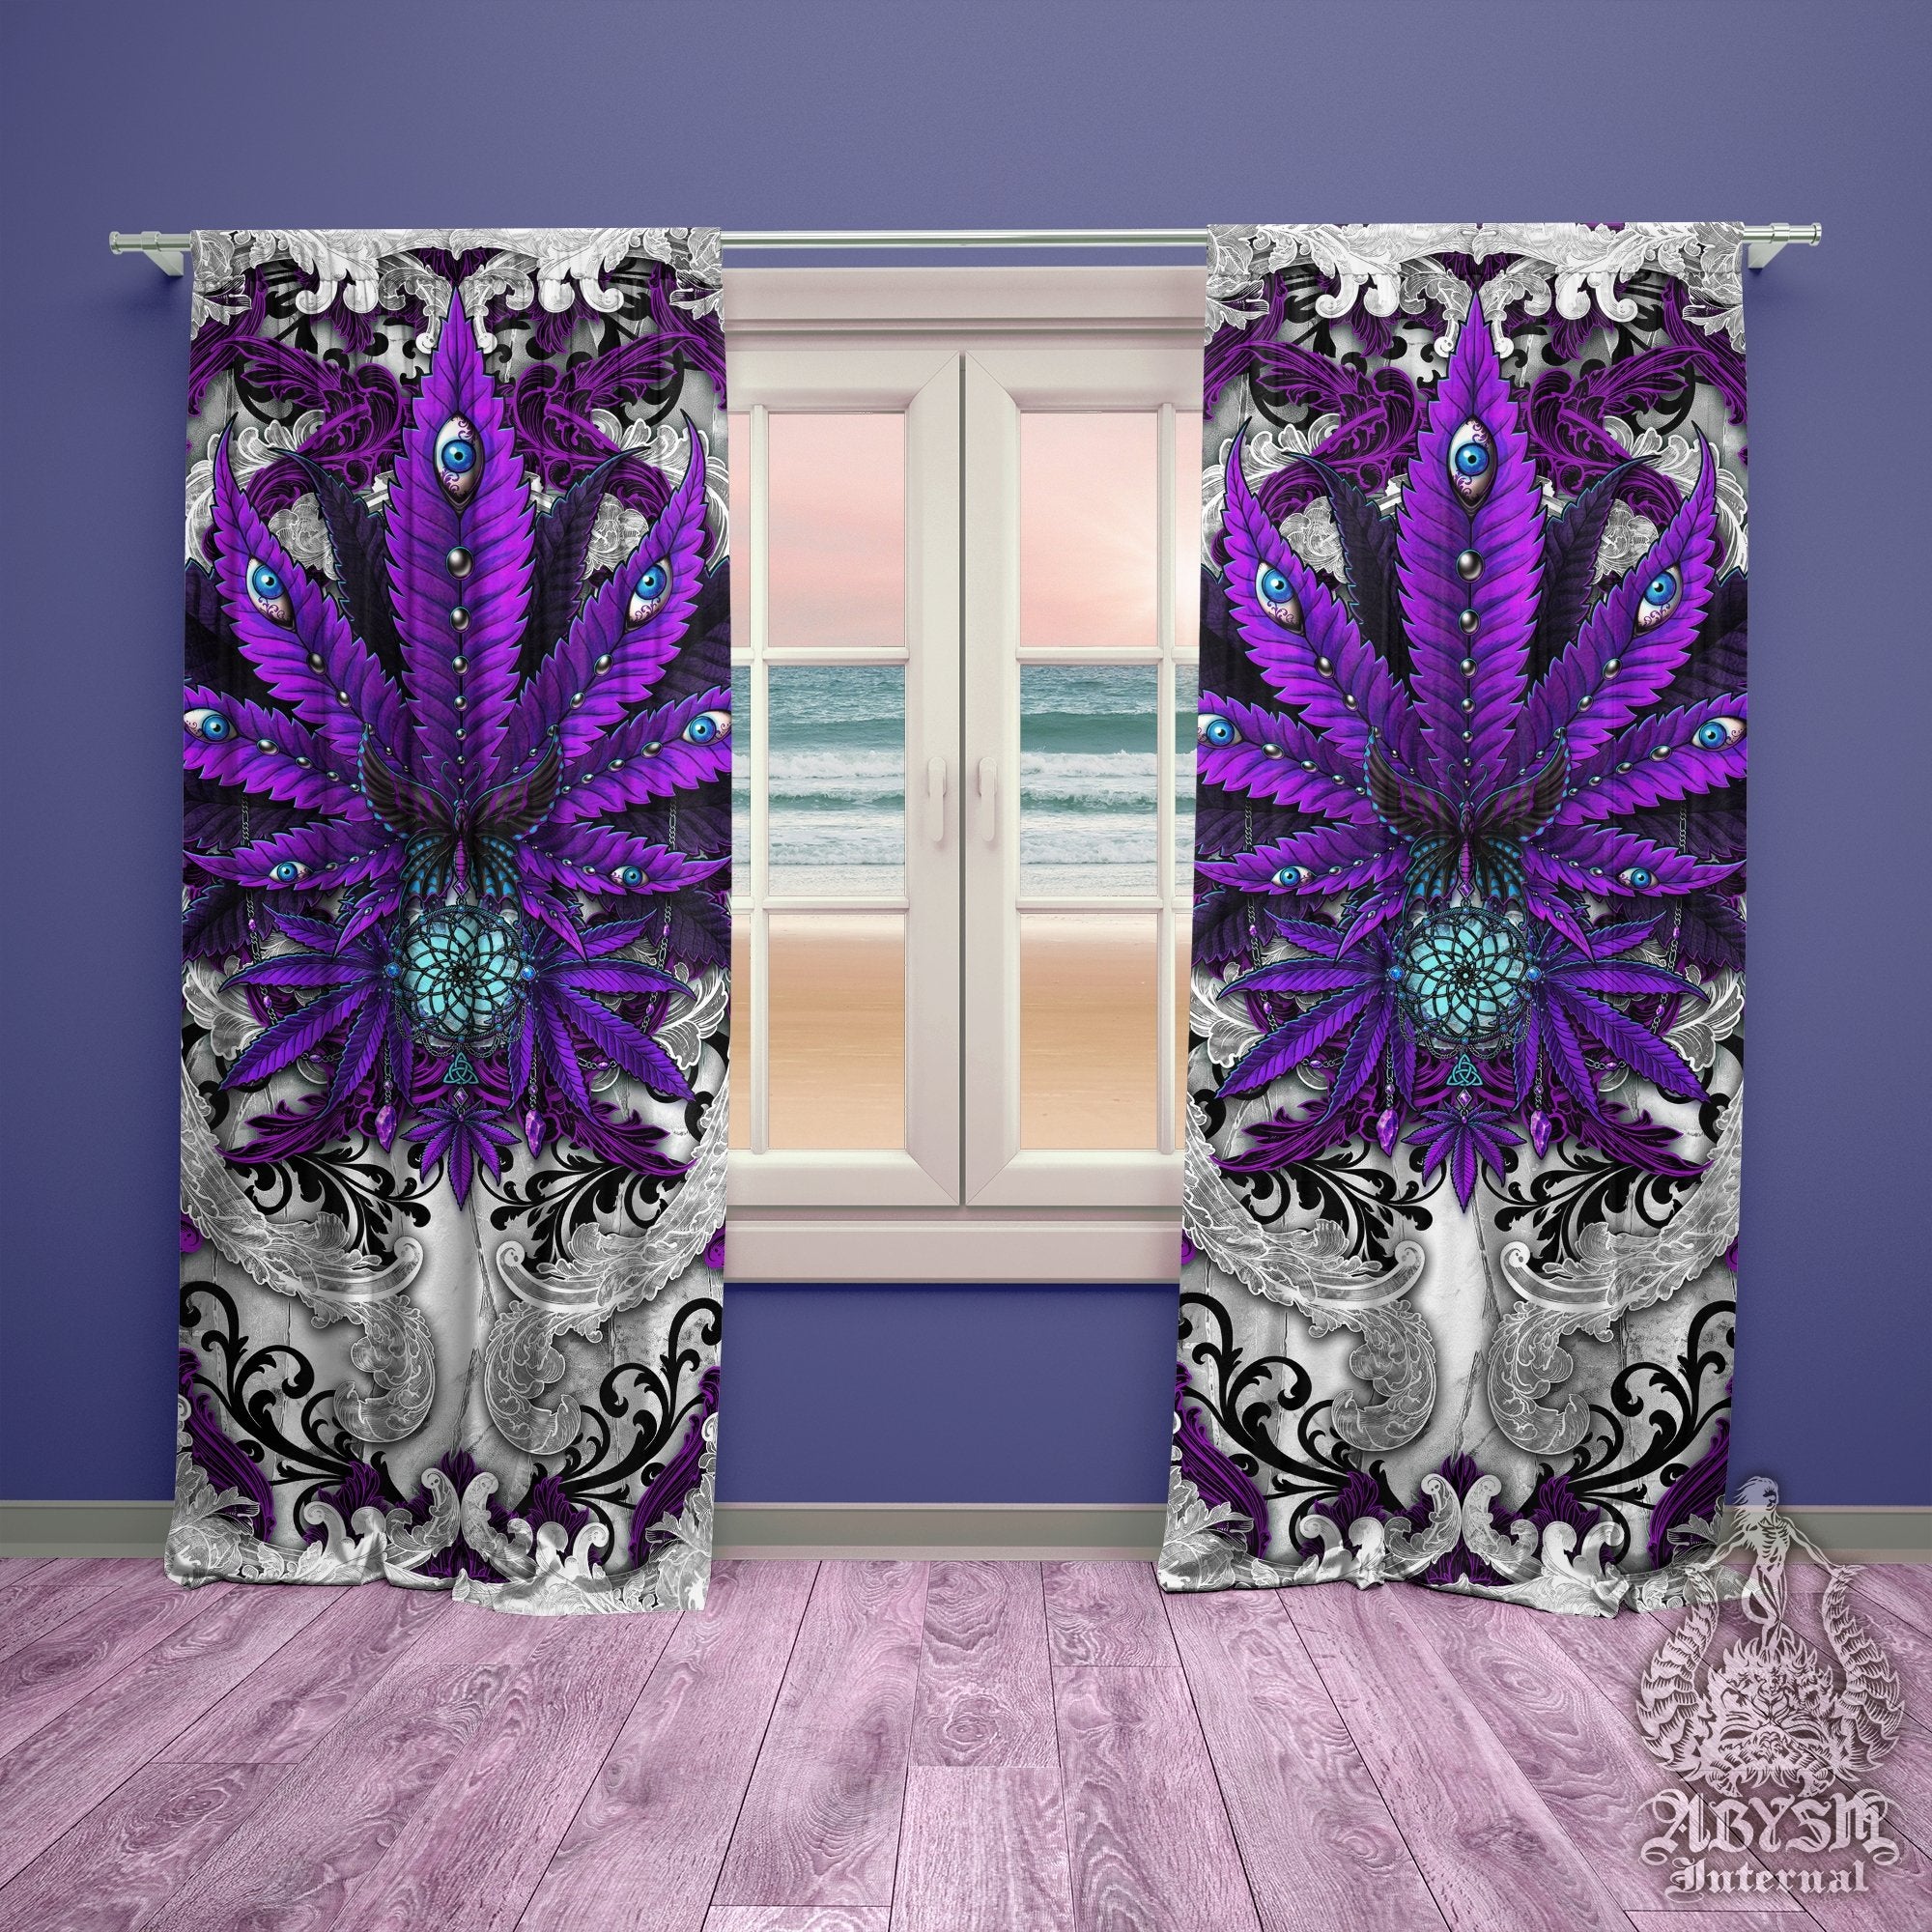 Weed Blackout Curtains, Cannabis Home and Shop Decor, Long Window Panels, Indie 420 Room Art Print - Purple White Goth - Abysm Internal